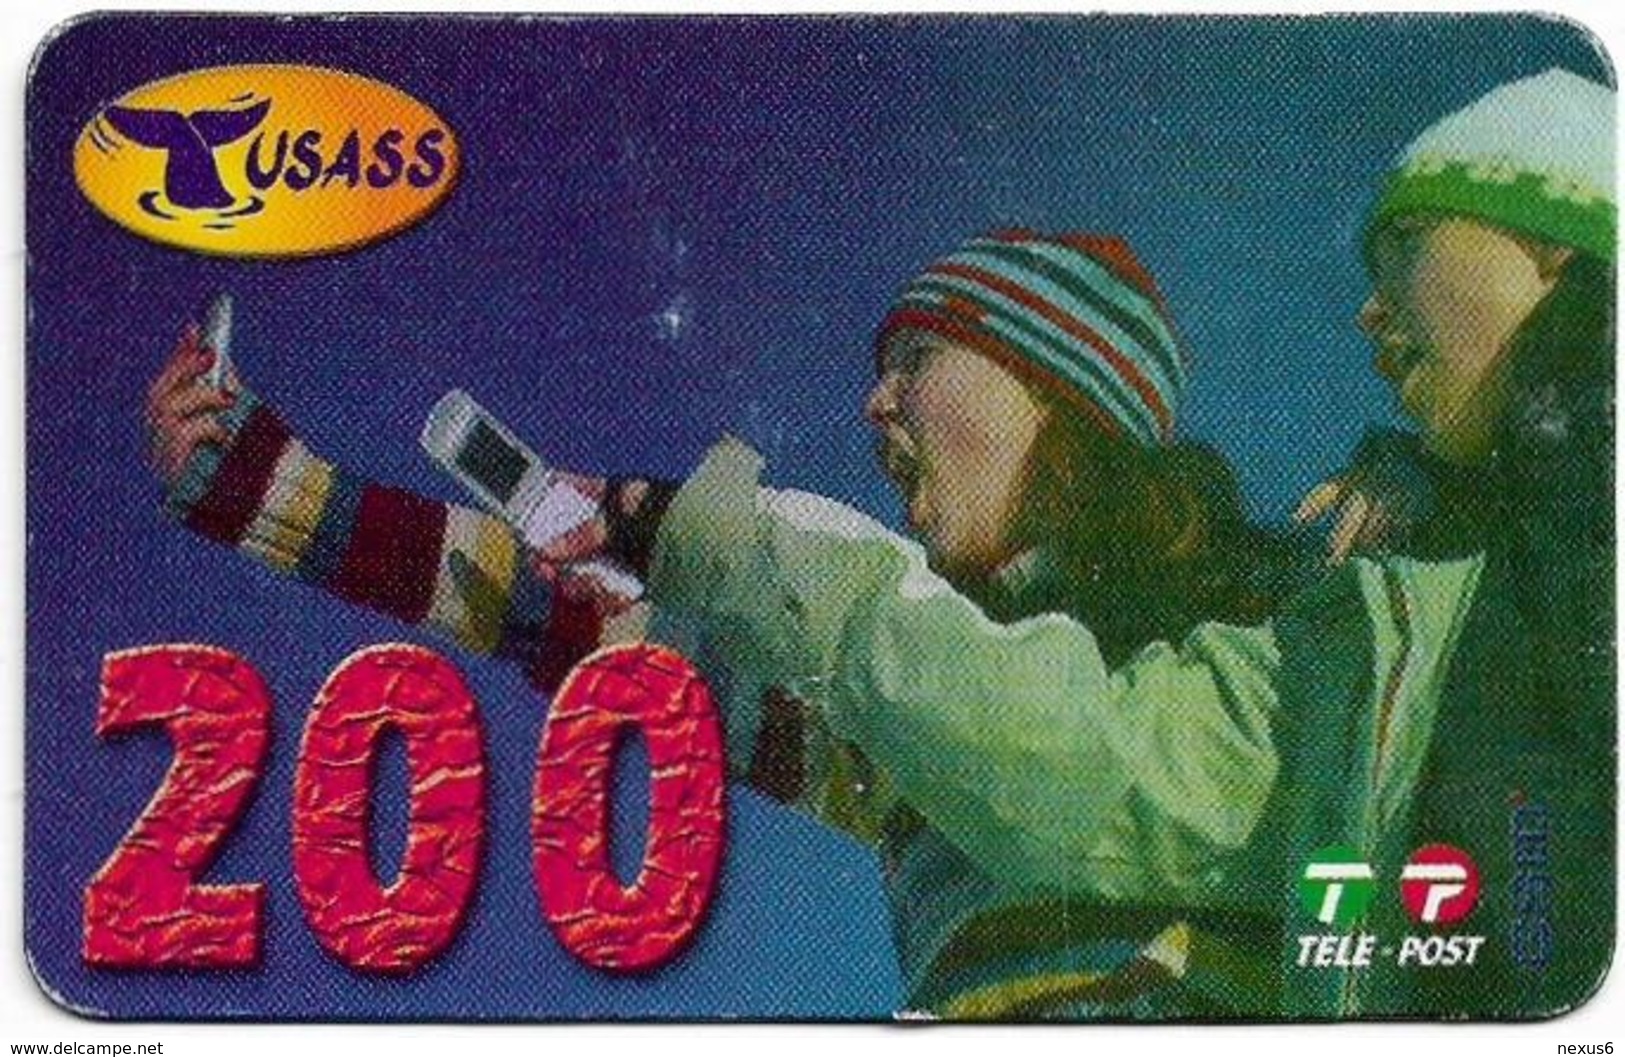 Greenland - Tusass - Two Girls With Mobile, GSM Refill, 200kr. Exp. 01.10.2006, Used - Grönland